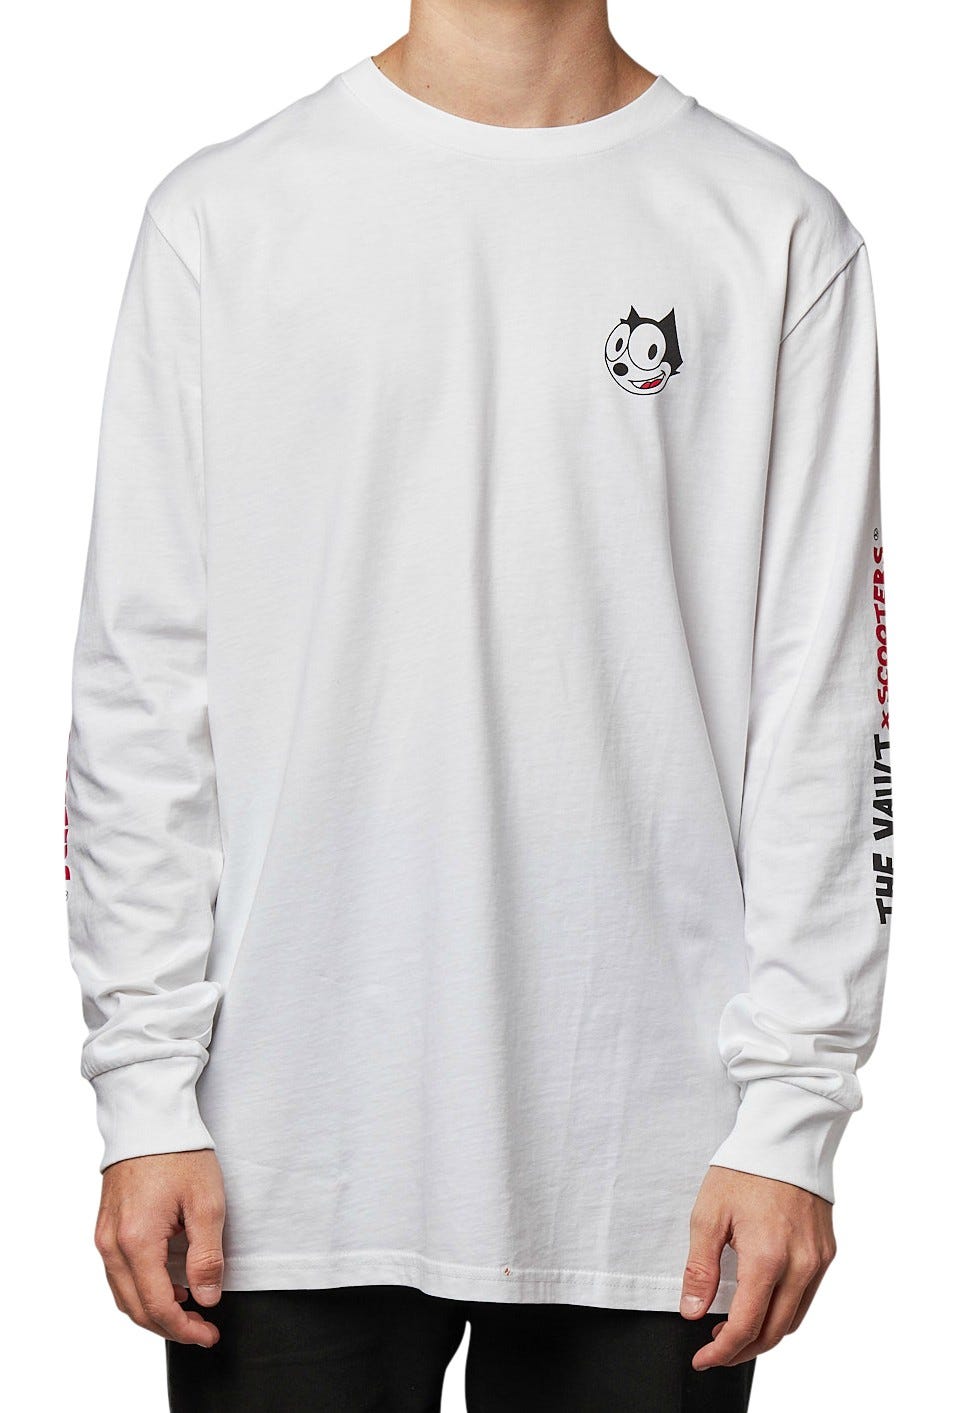 TV Scooter Cats Long Sleeve